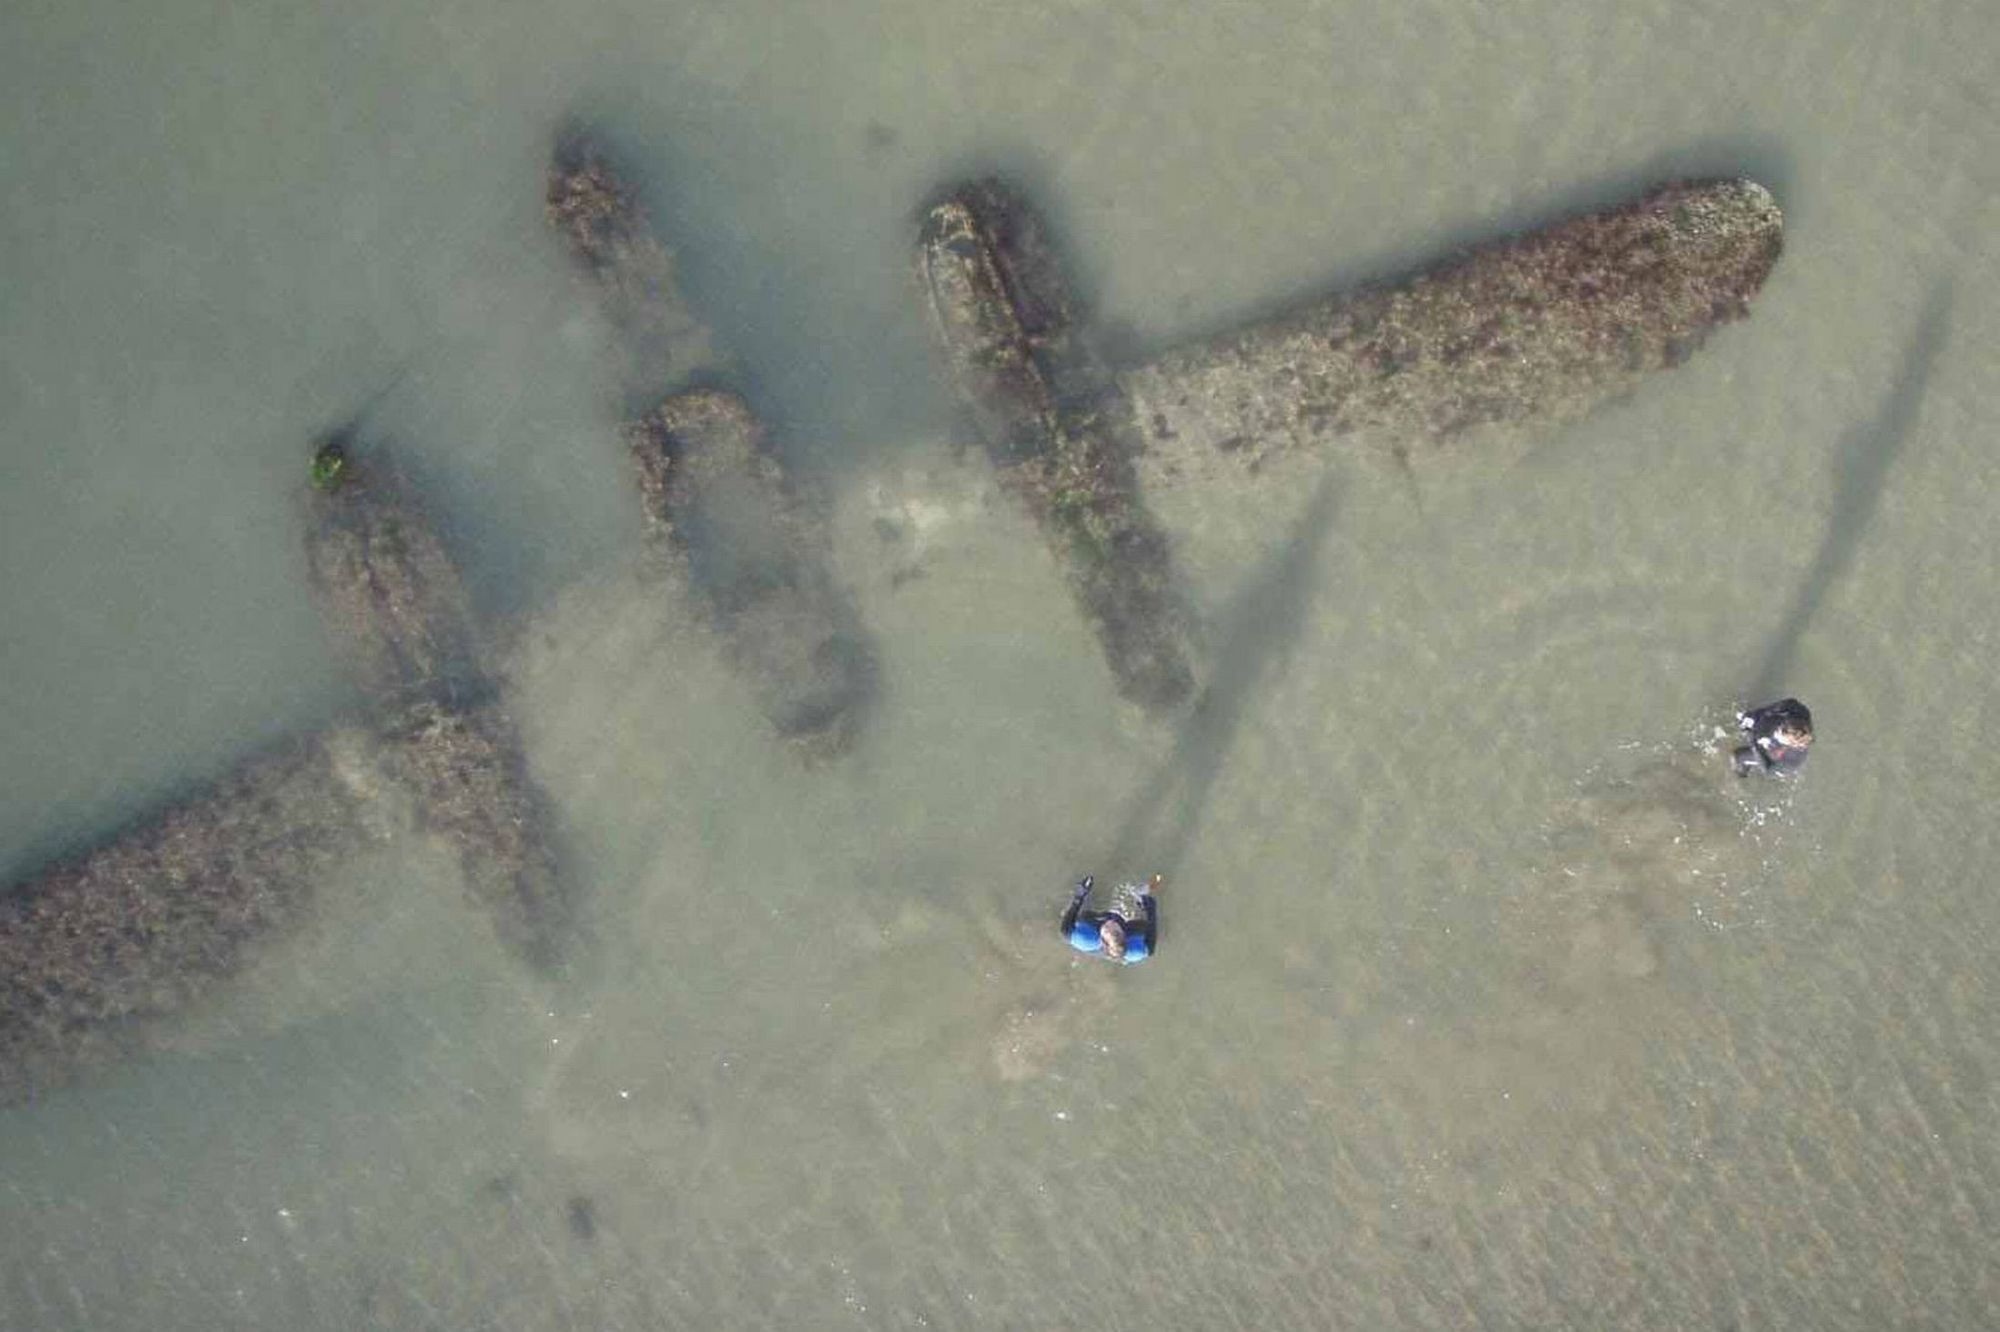 A P-38 plane, found on a beach in Wales.